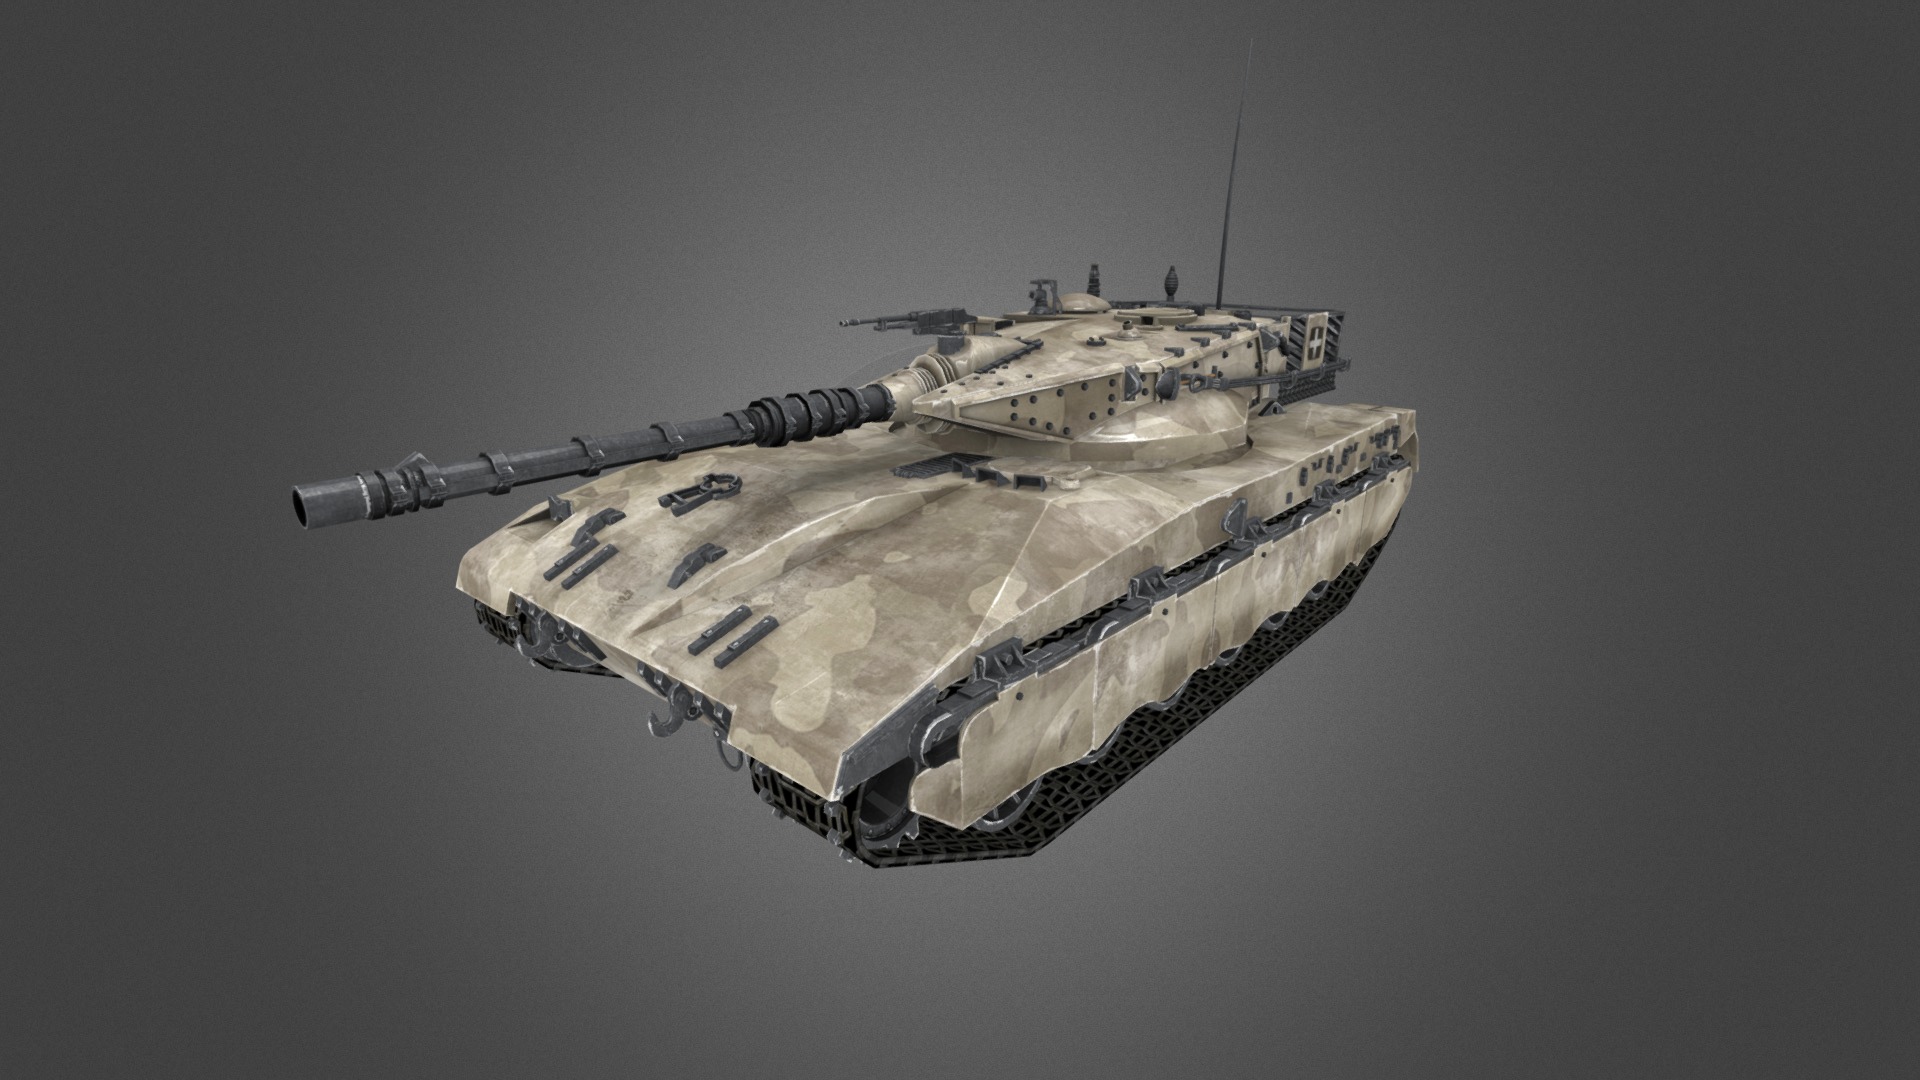 All funds raised will go to help the Ukrainian army and the fight against the Russian invaders, as well as our team, which is currently under fire from the Russian army in Ukrainian civilian cities.

Thank you all for your understanding



Game Ready low poly 3d model of Merkava Tank - Merkava Tank - Buy Royalty Free 3D model by CG Duck (@cg_duck) 3d model